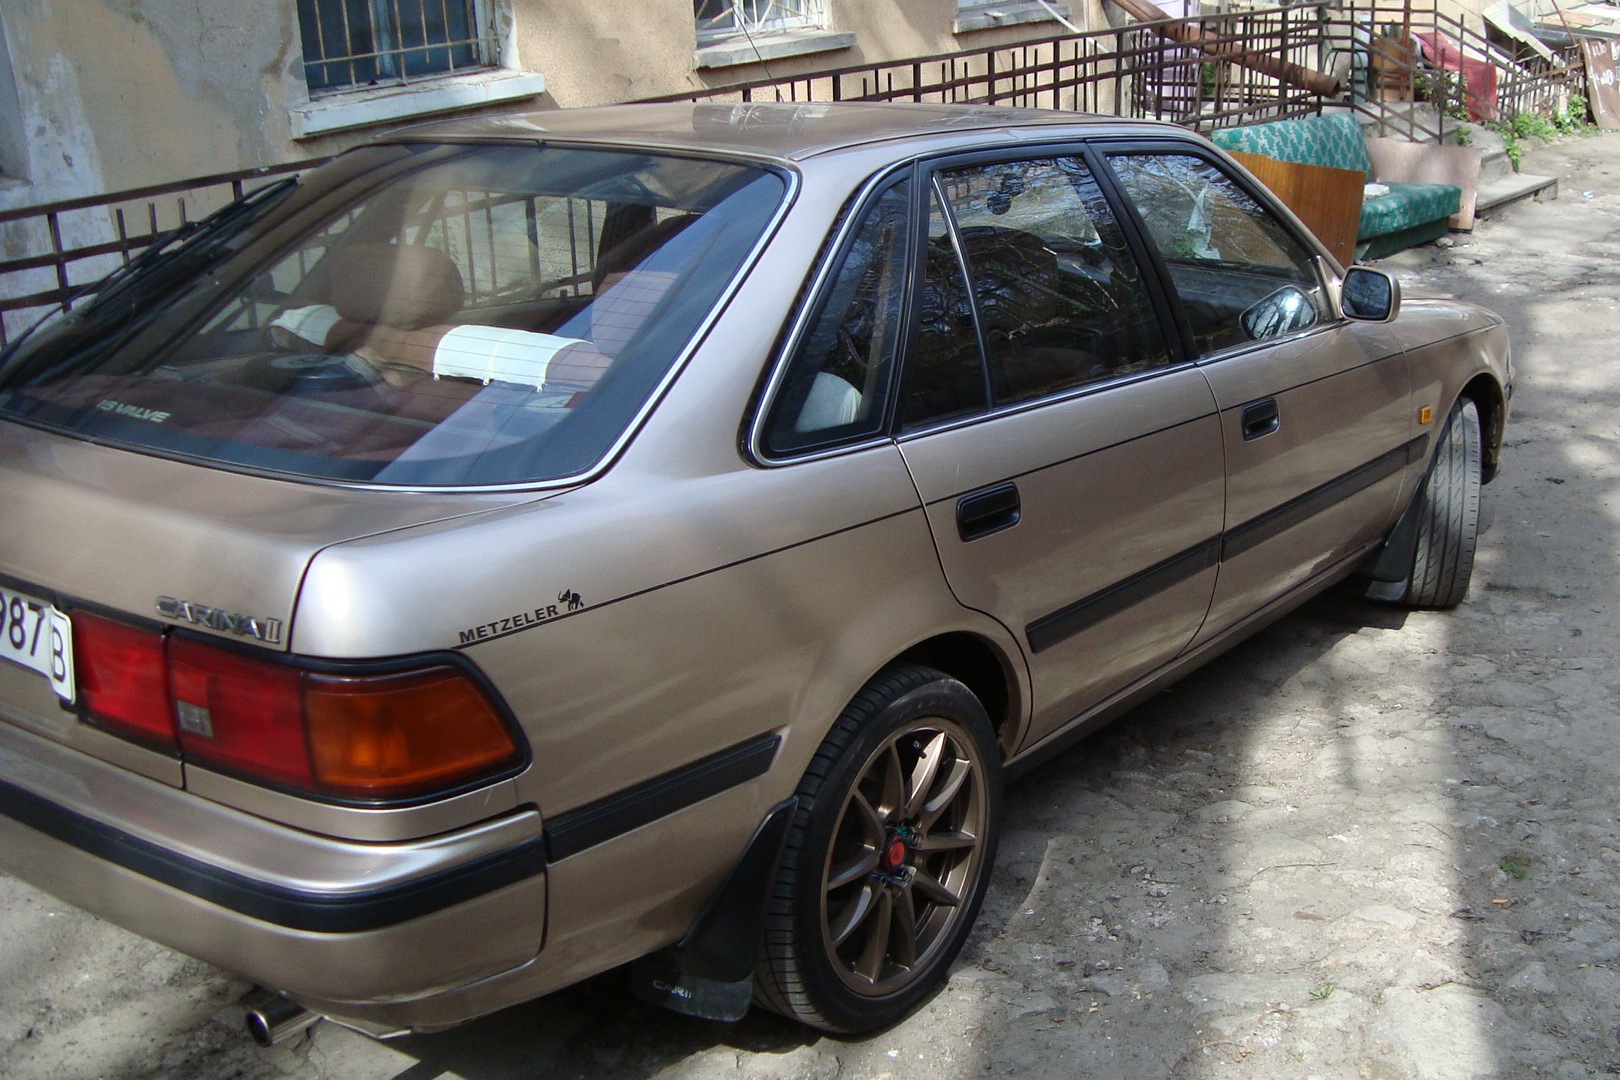 we are like that after winter - Toyota Carina II 20 l 1991